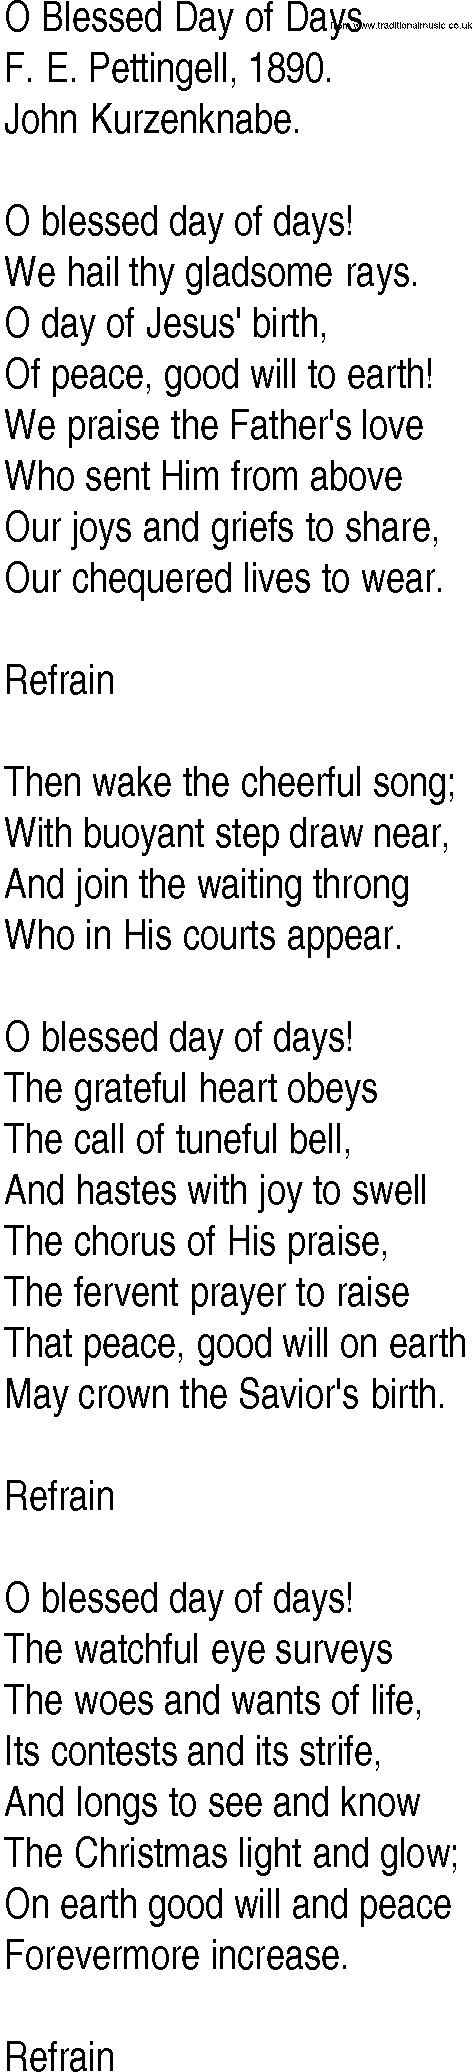 Hymn and Gospel Song: O Blessed Day of Days by F E Pettingell lyrics